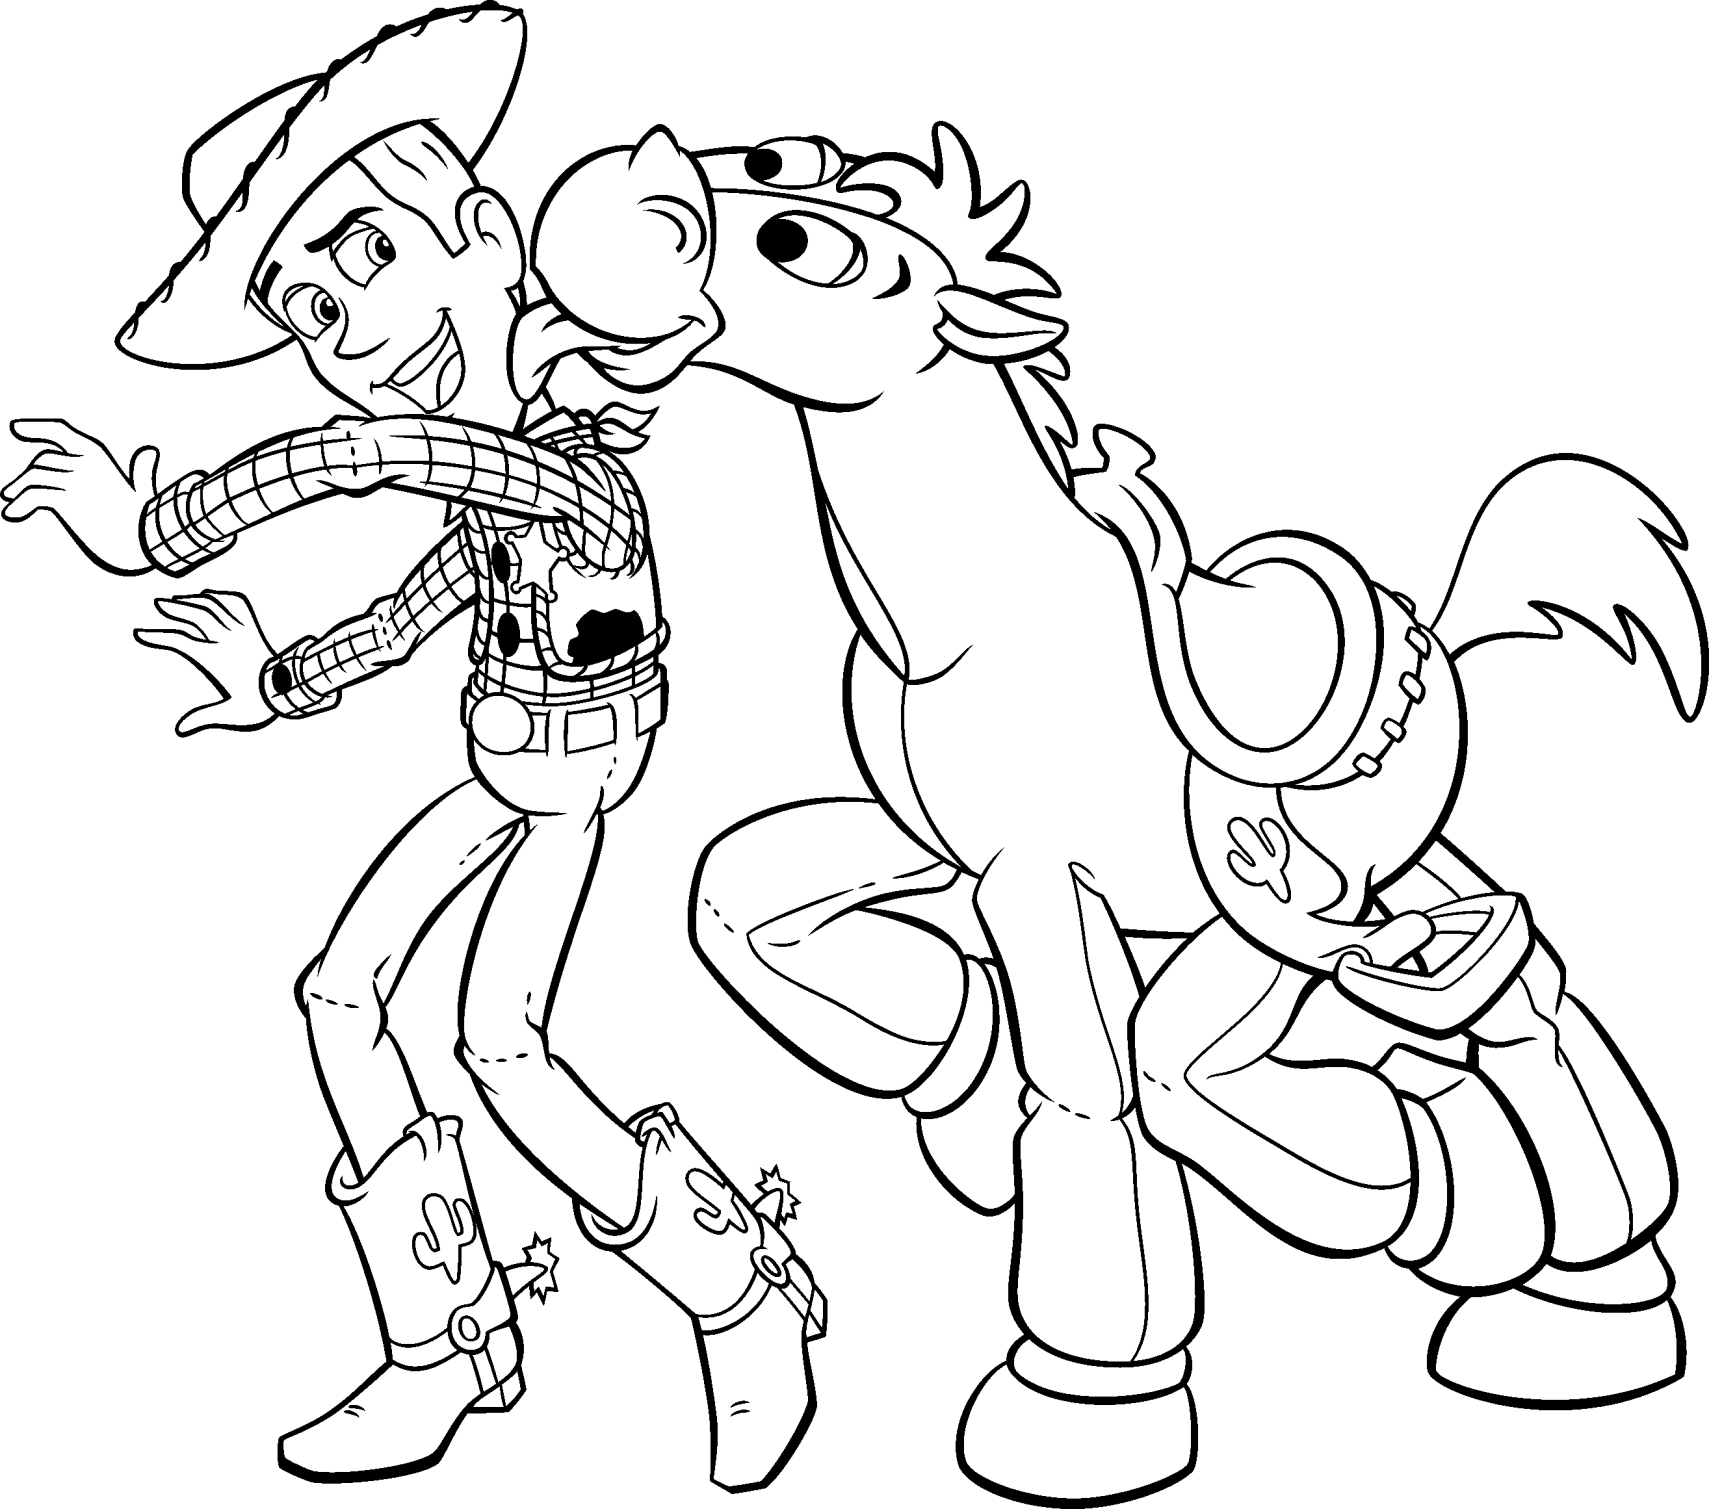 Disney Toy Story Coloring Pages Image